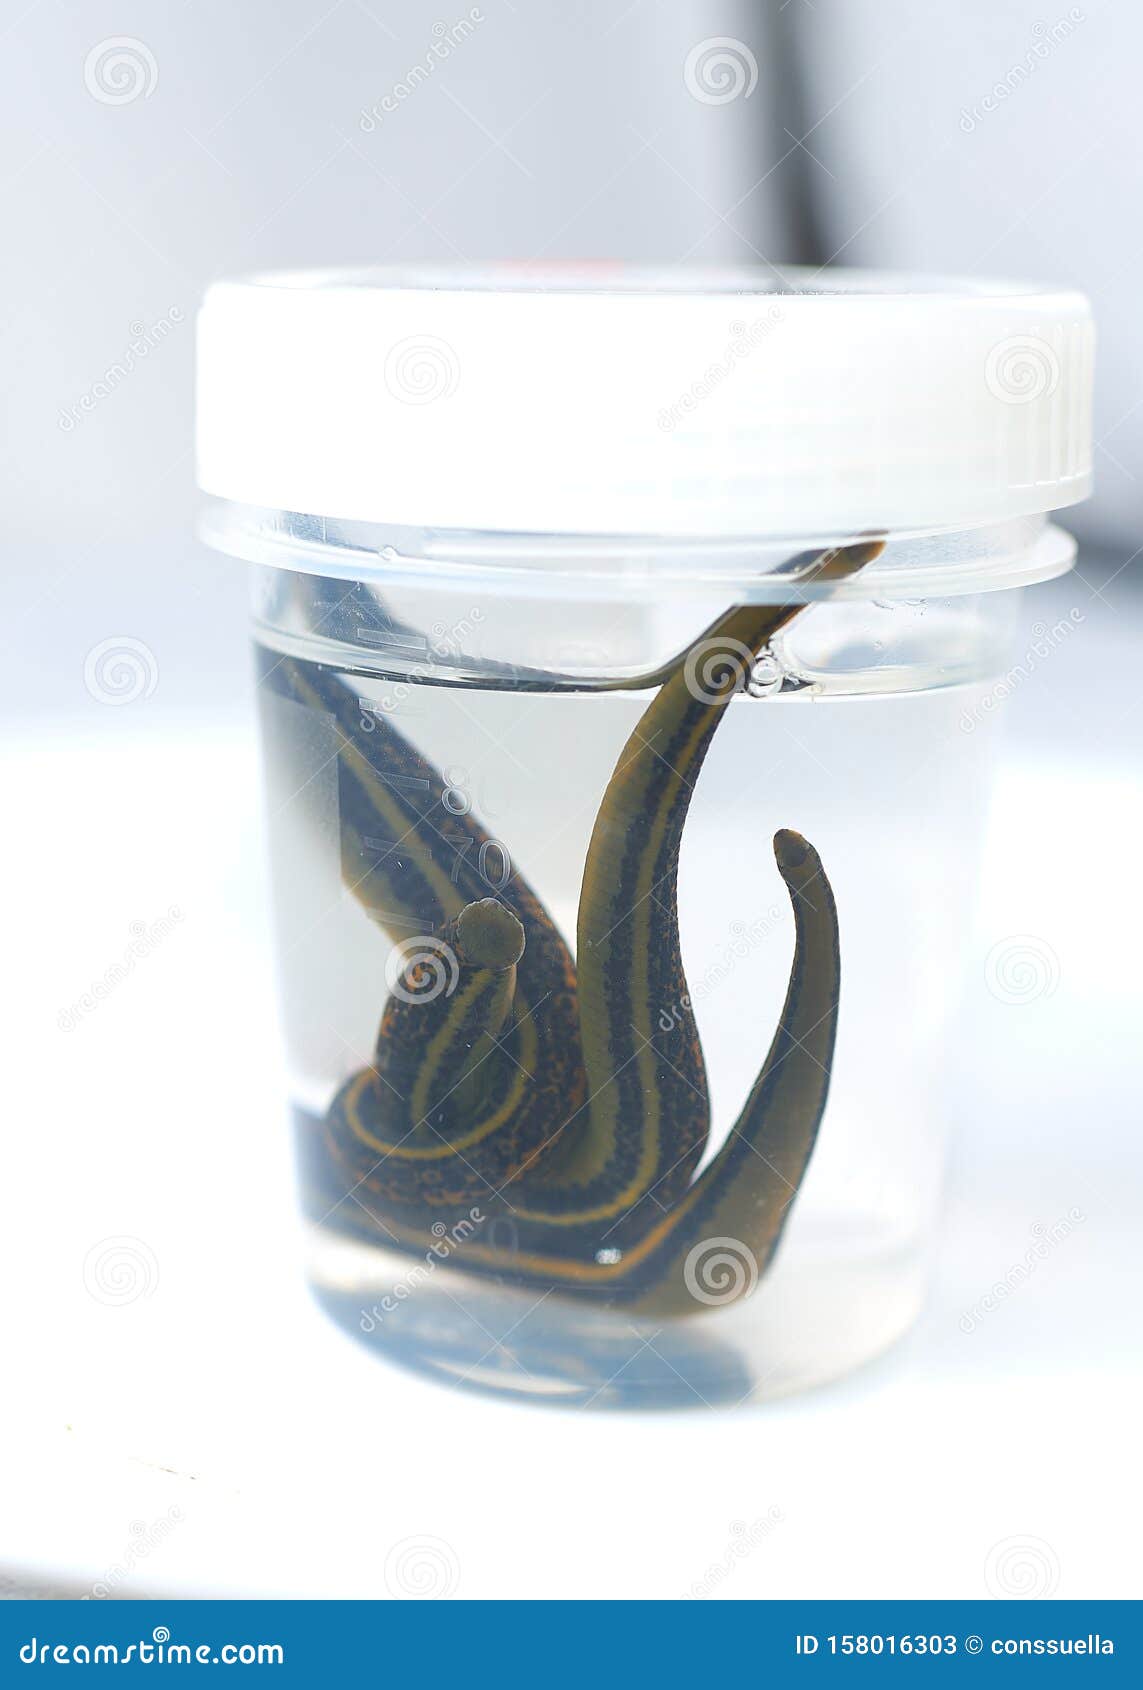 Hirudotherapy. Medical Leeches in a Glass in Water Stock Image